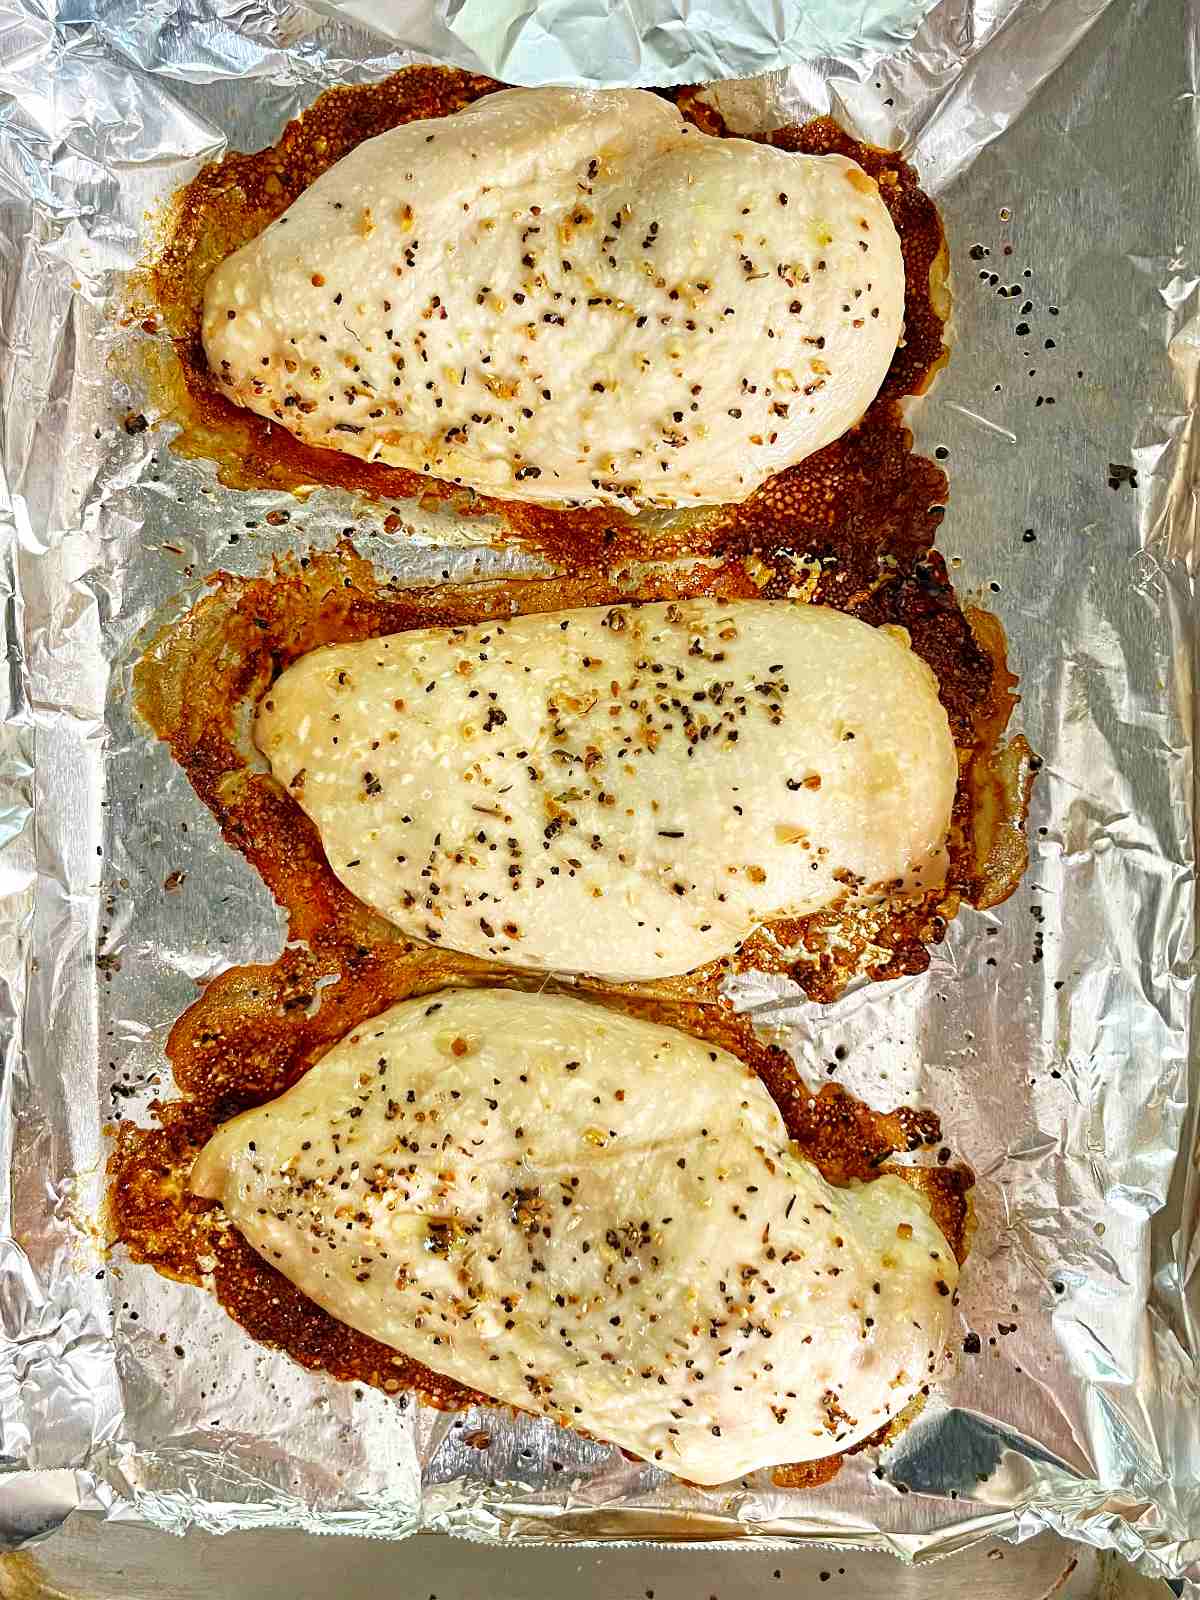 Three cooked chicken breasts on a sheet of aluminum foil.